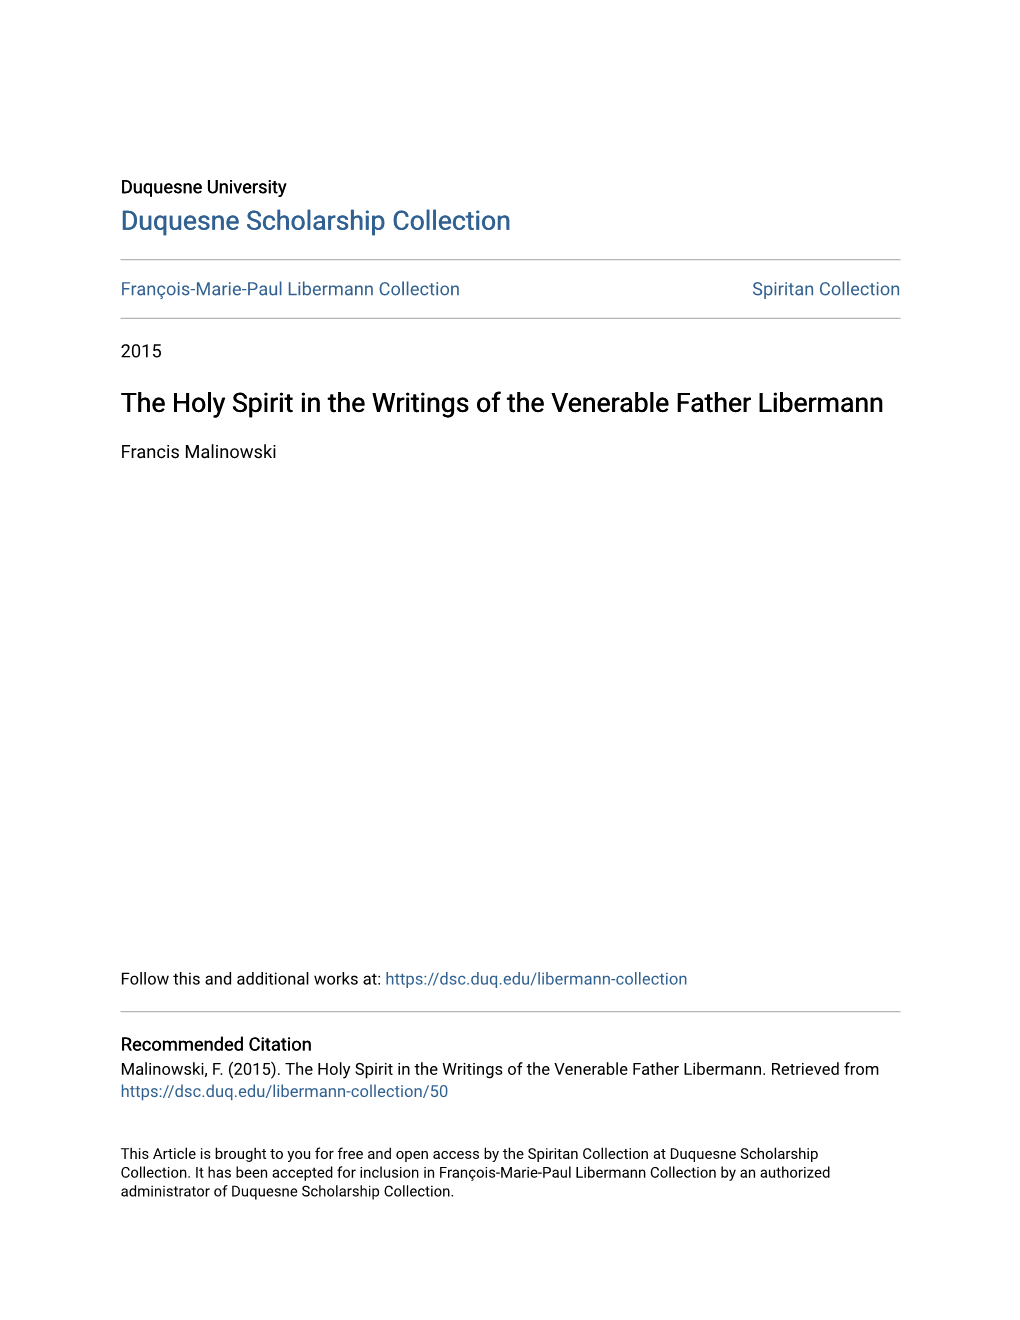 The Holy Spirit in the Writings of the Venerable Father Libermann